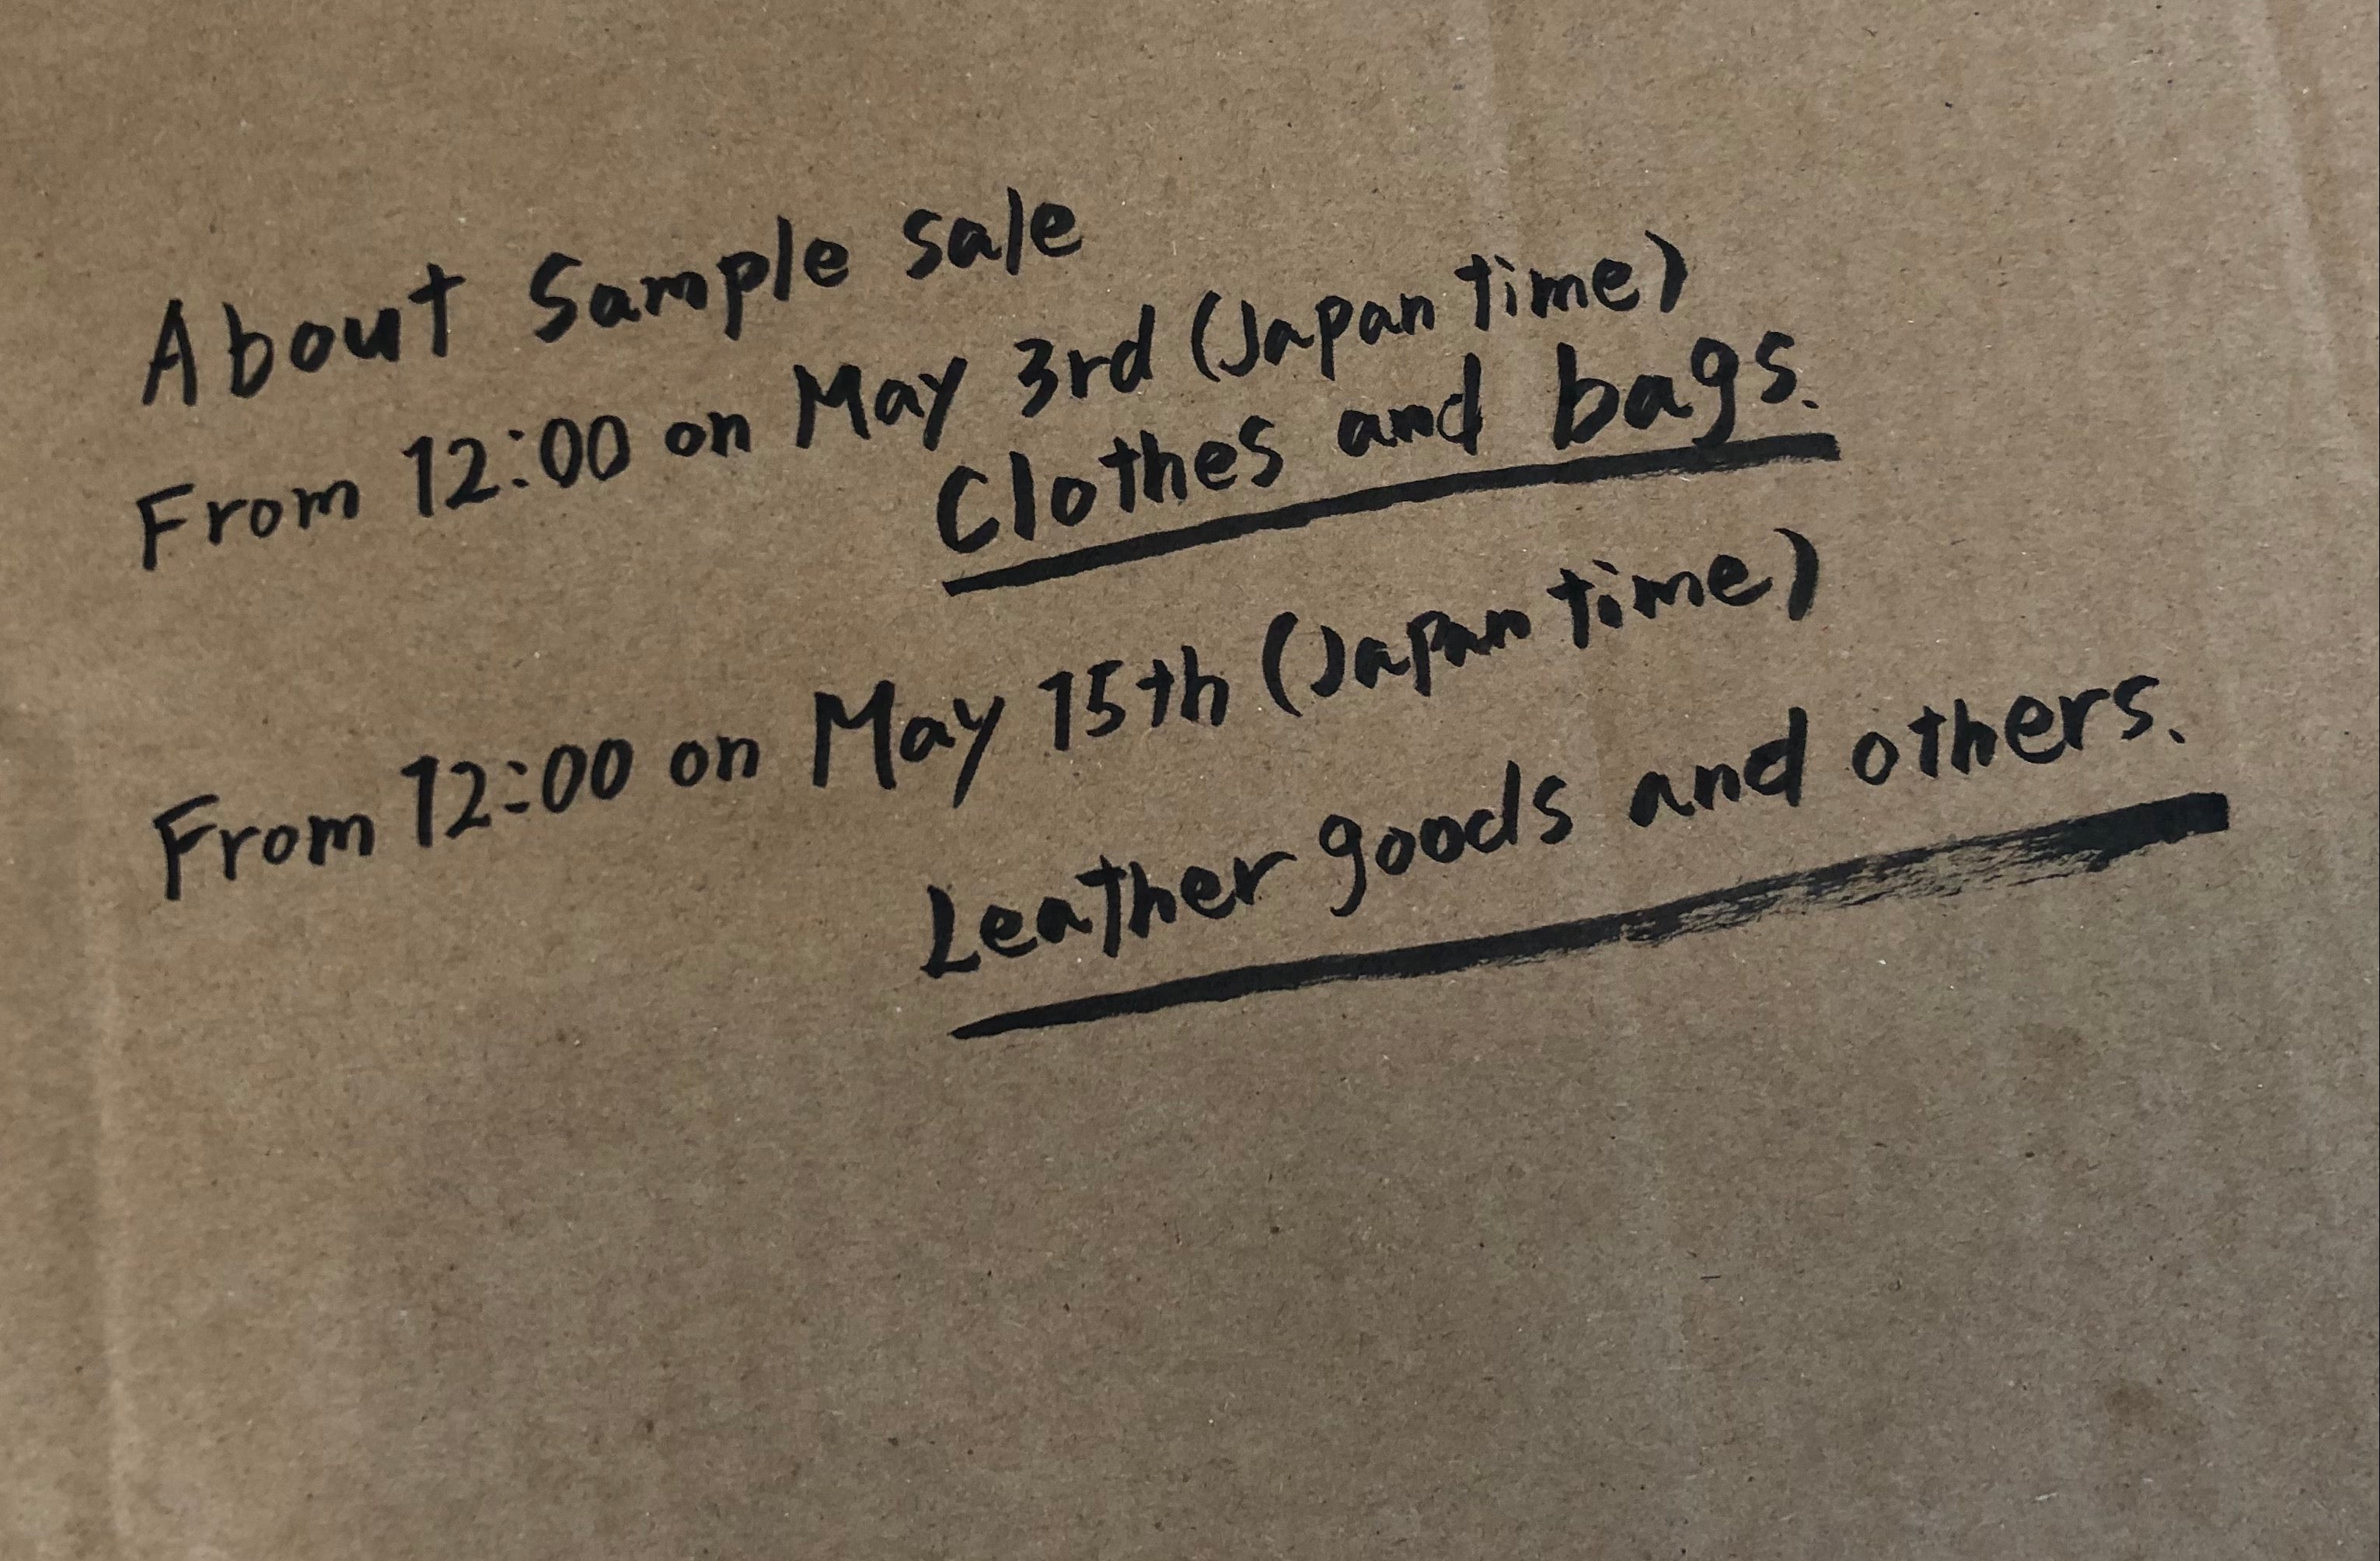 About sample sale!